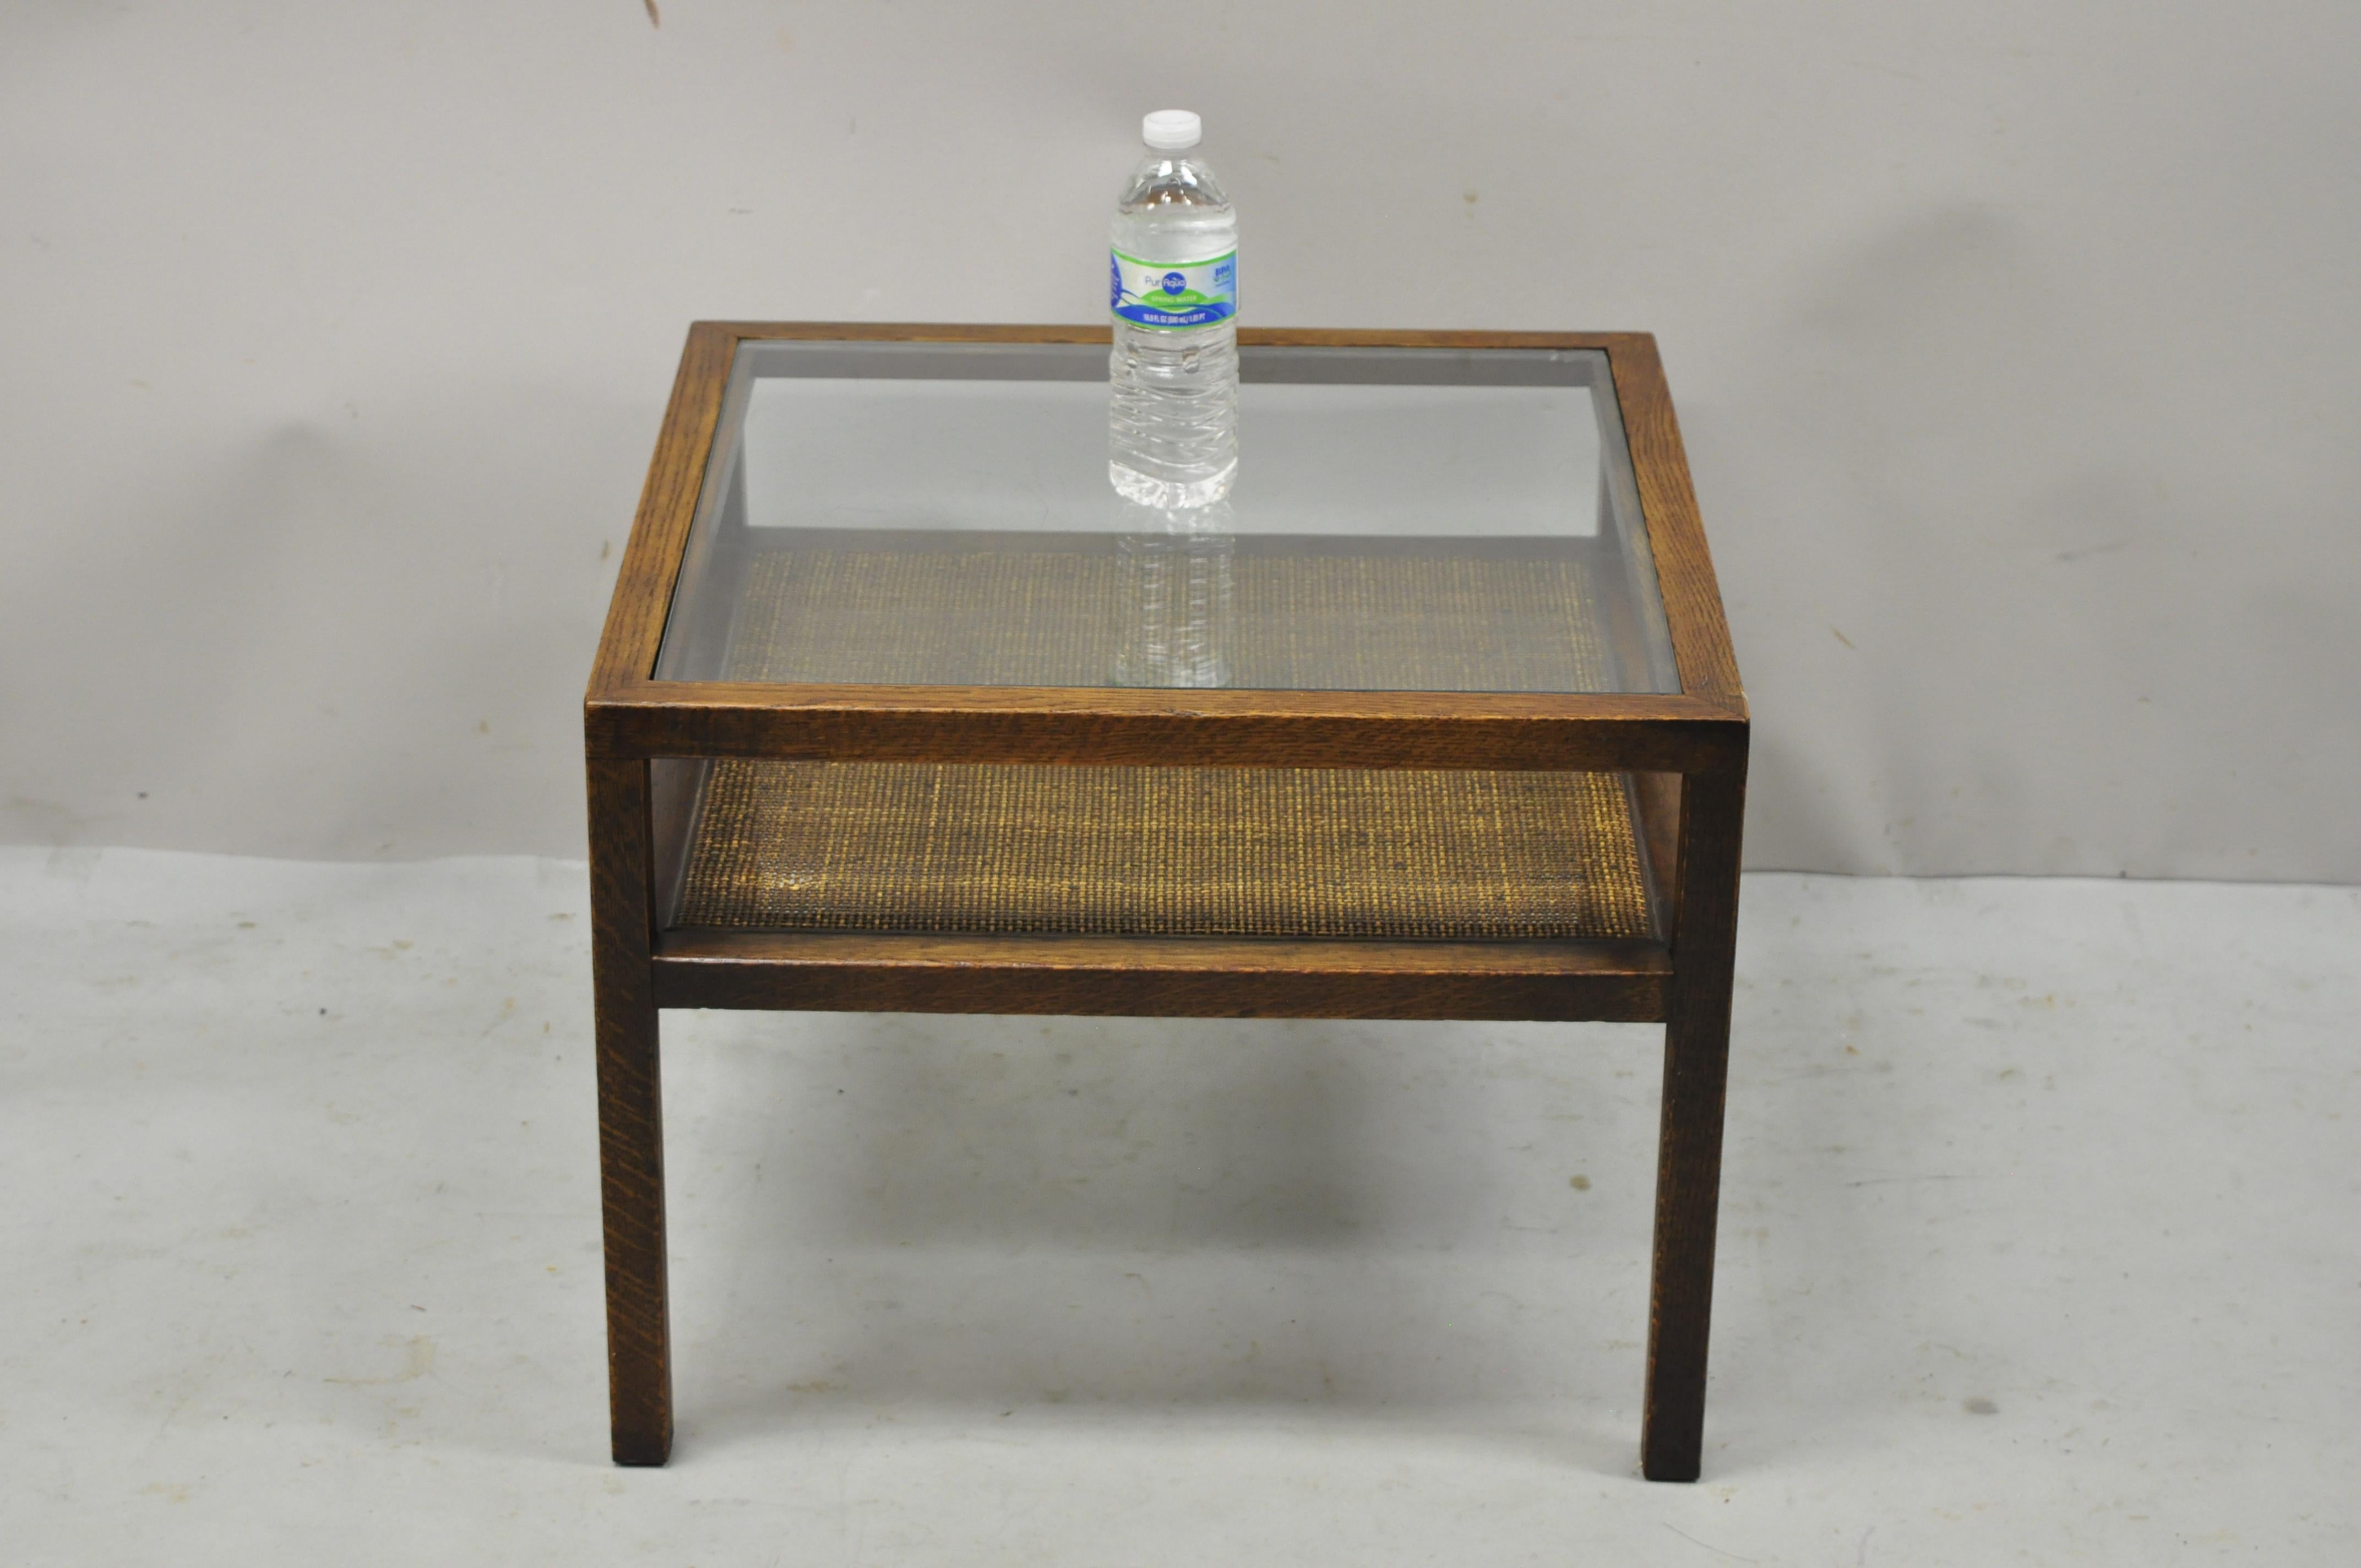 Mid-Century Modern oak wood and cane 2 tier glass top small square side table in the Dunbar style. Item features inset glass top, cane lower shelf, solid wood frame, beautiful wood grain, clean modernist lines. Circa mid 20th century. Measurements: